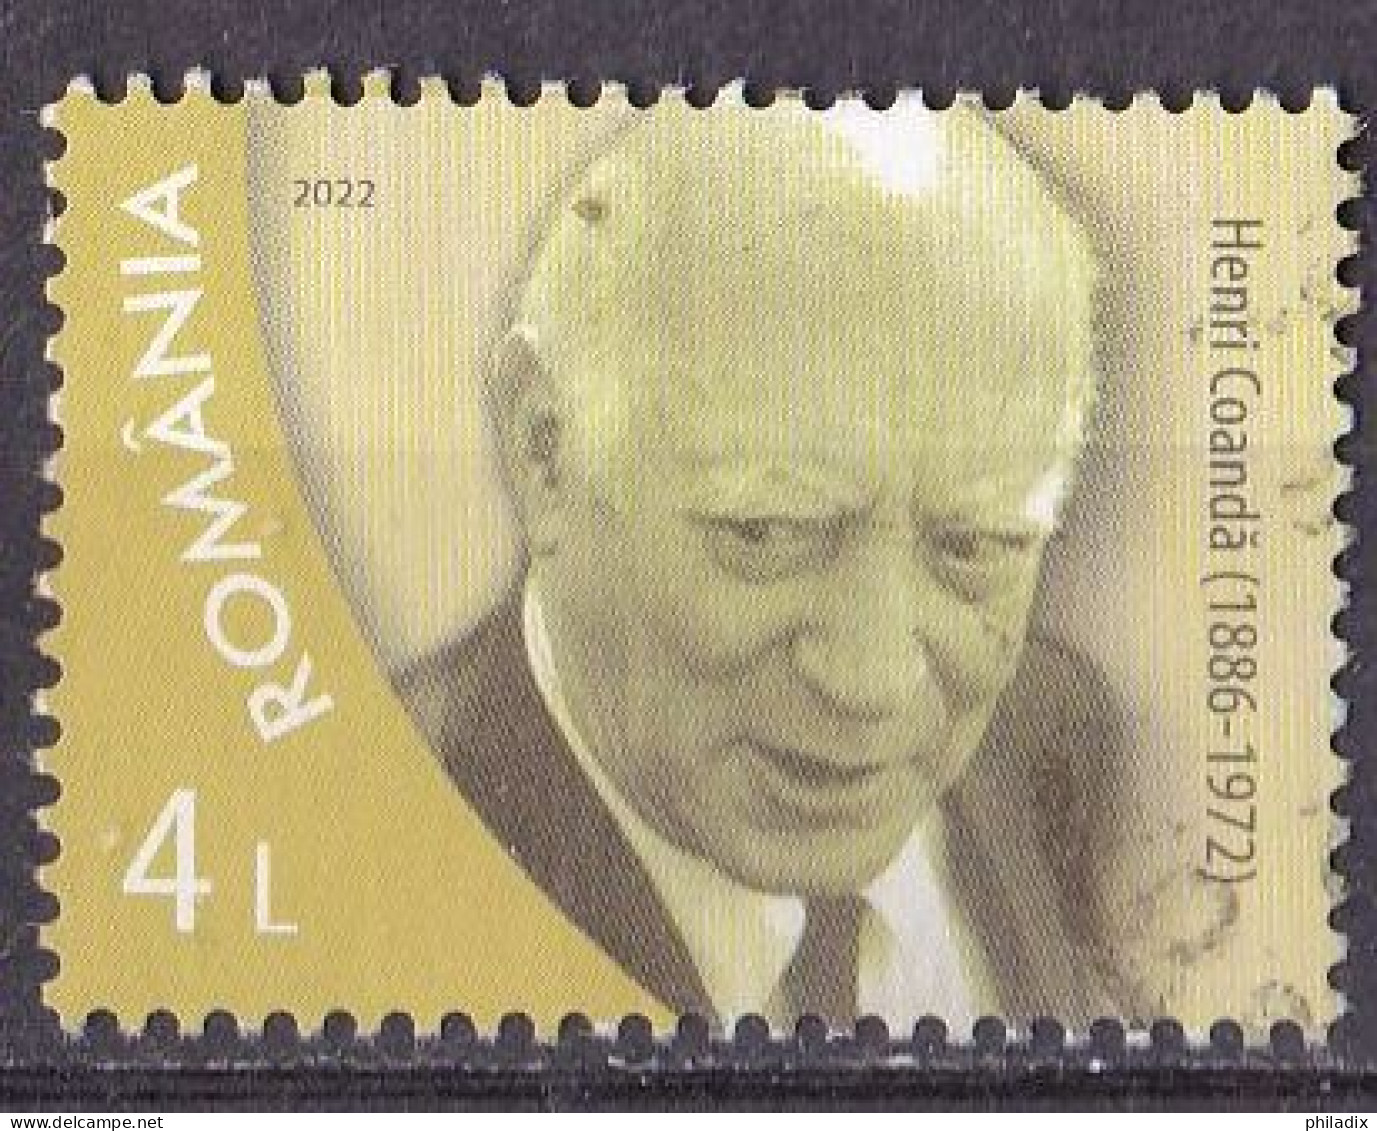 Rumänien Marke Von 2022 O/used (A5-13) - Used Stamps